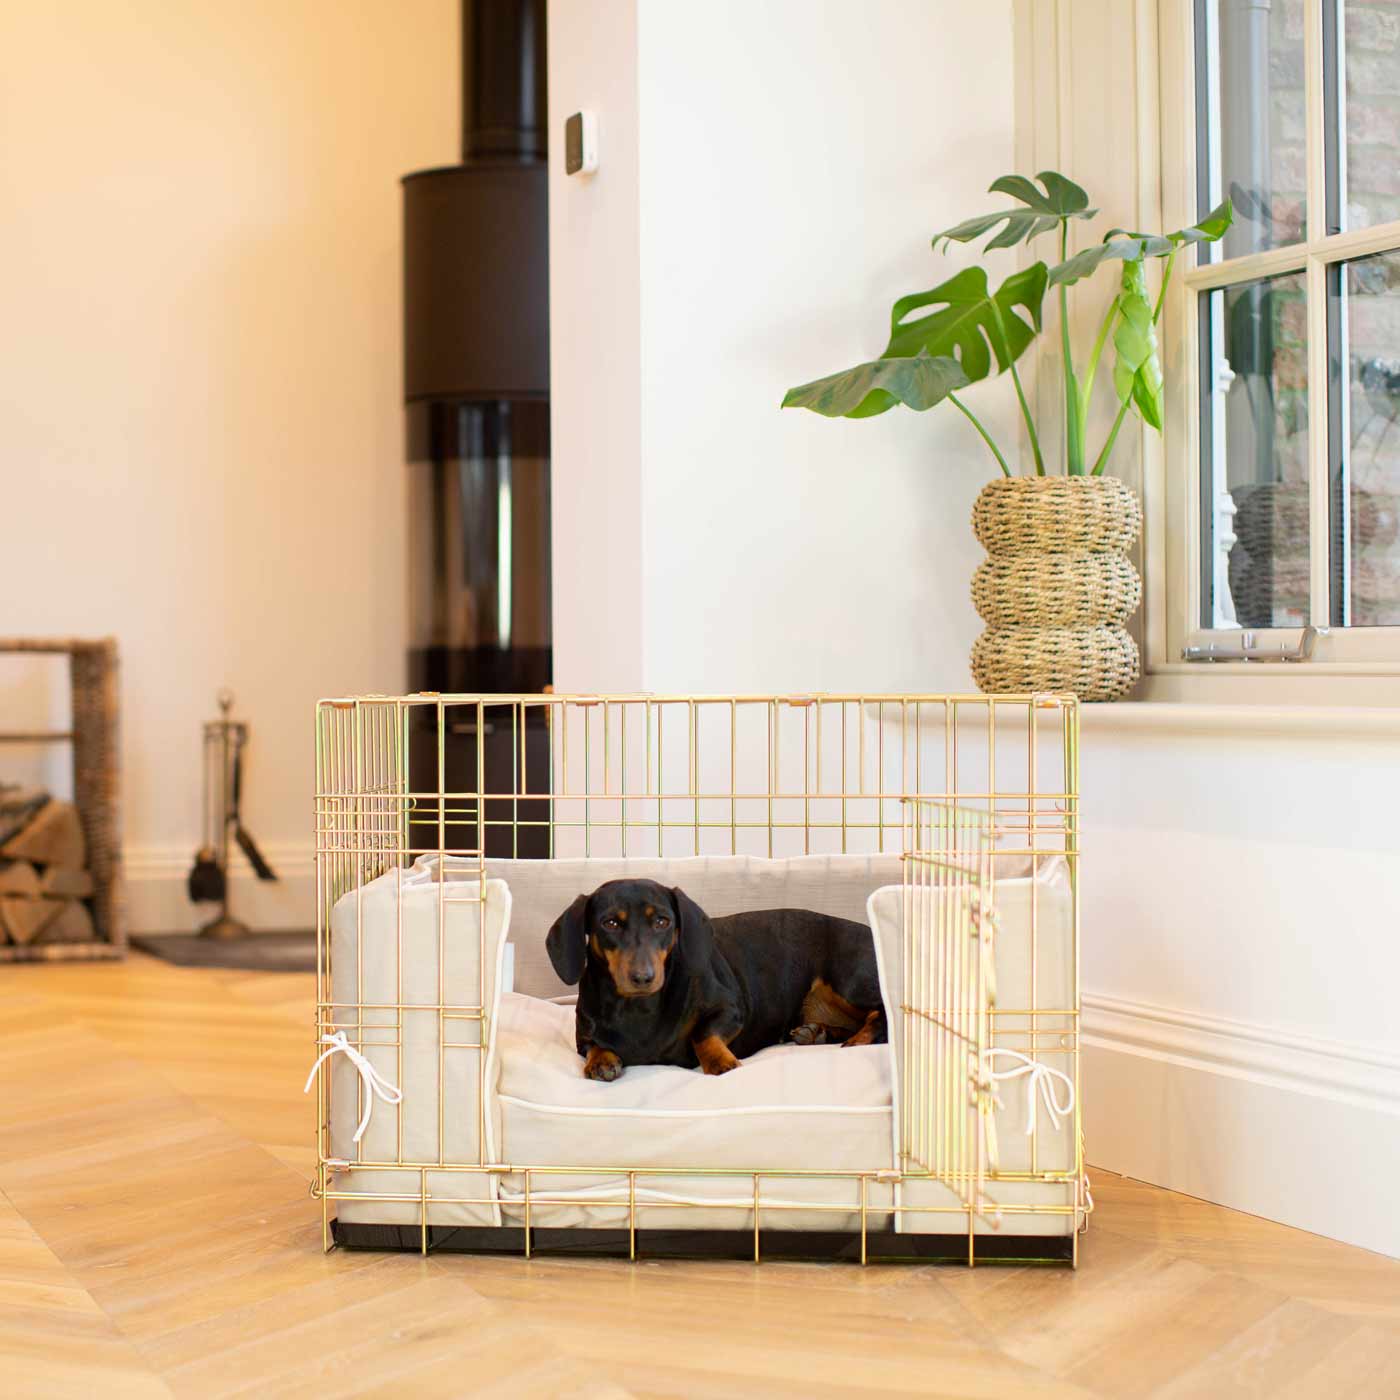 Discover Our Heavy-Duty Gold Dog Cage With Savanna Oatmeal Cushion & Bumper! The Perfect Cage Accessorize. Available To Personalize Here at Lords & Labradors US